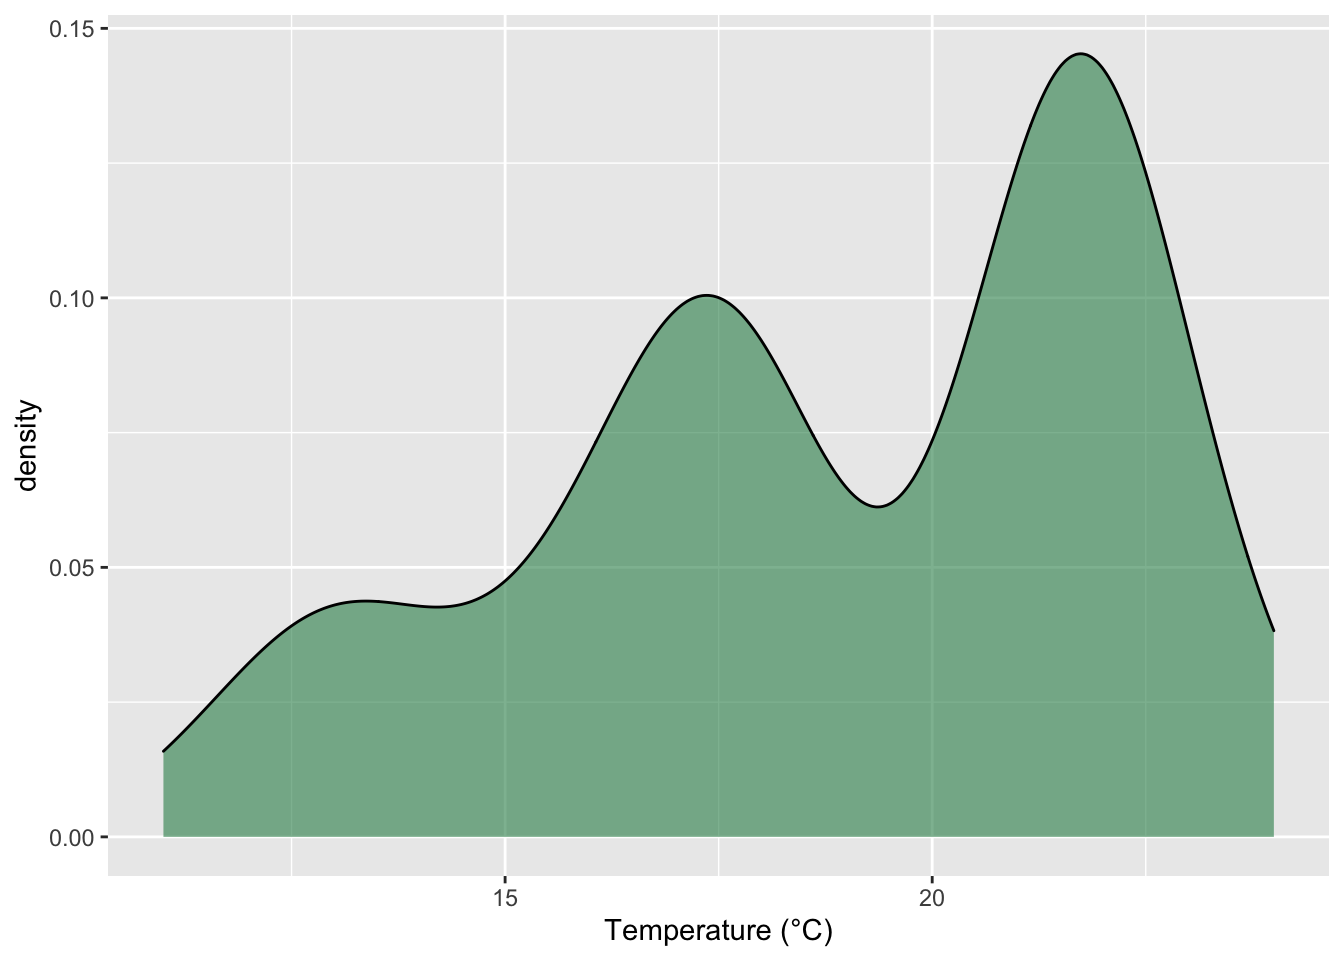 Frequency distribution of mean temperature for each time series in the SACTN dataset.